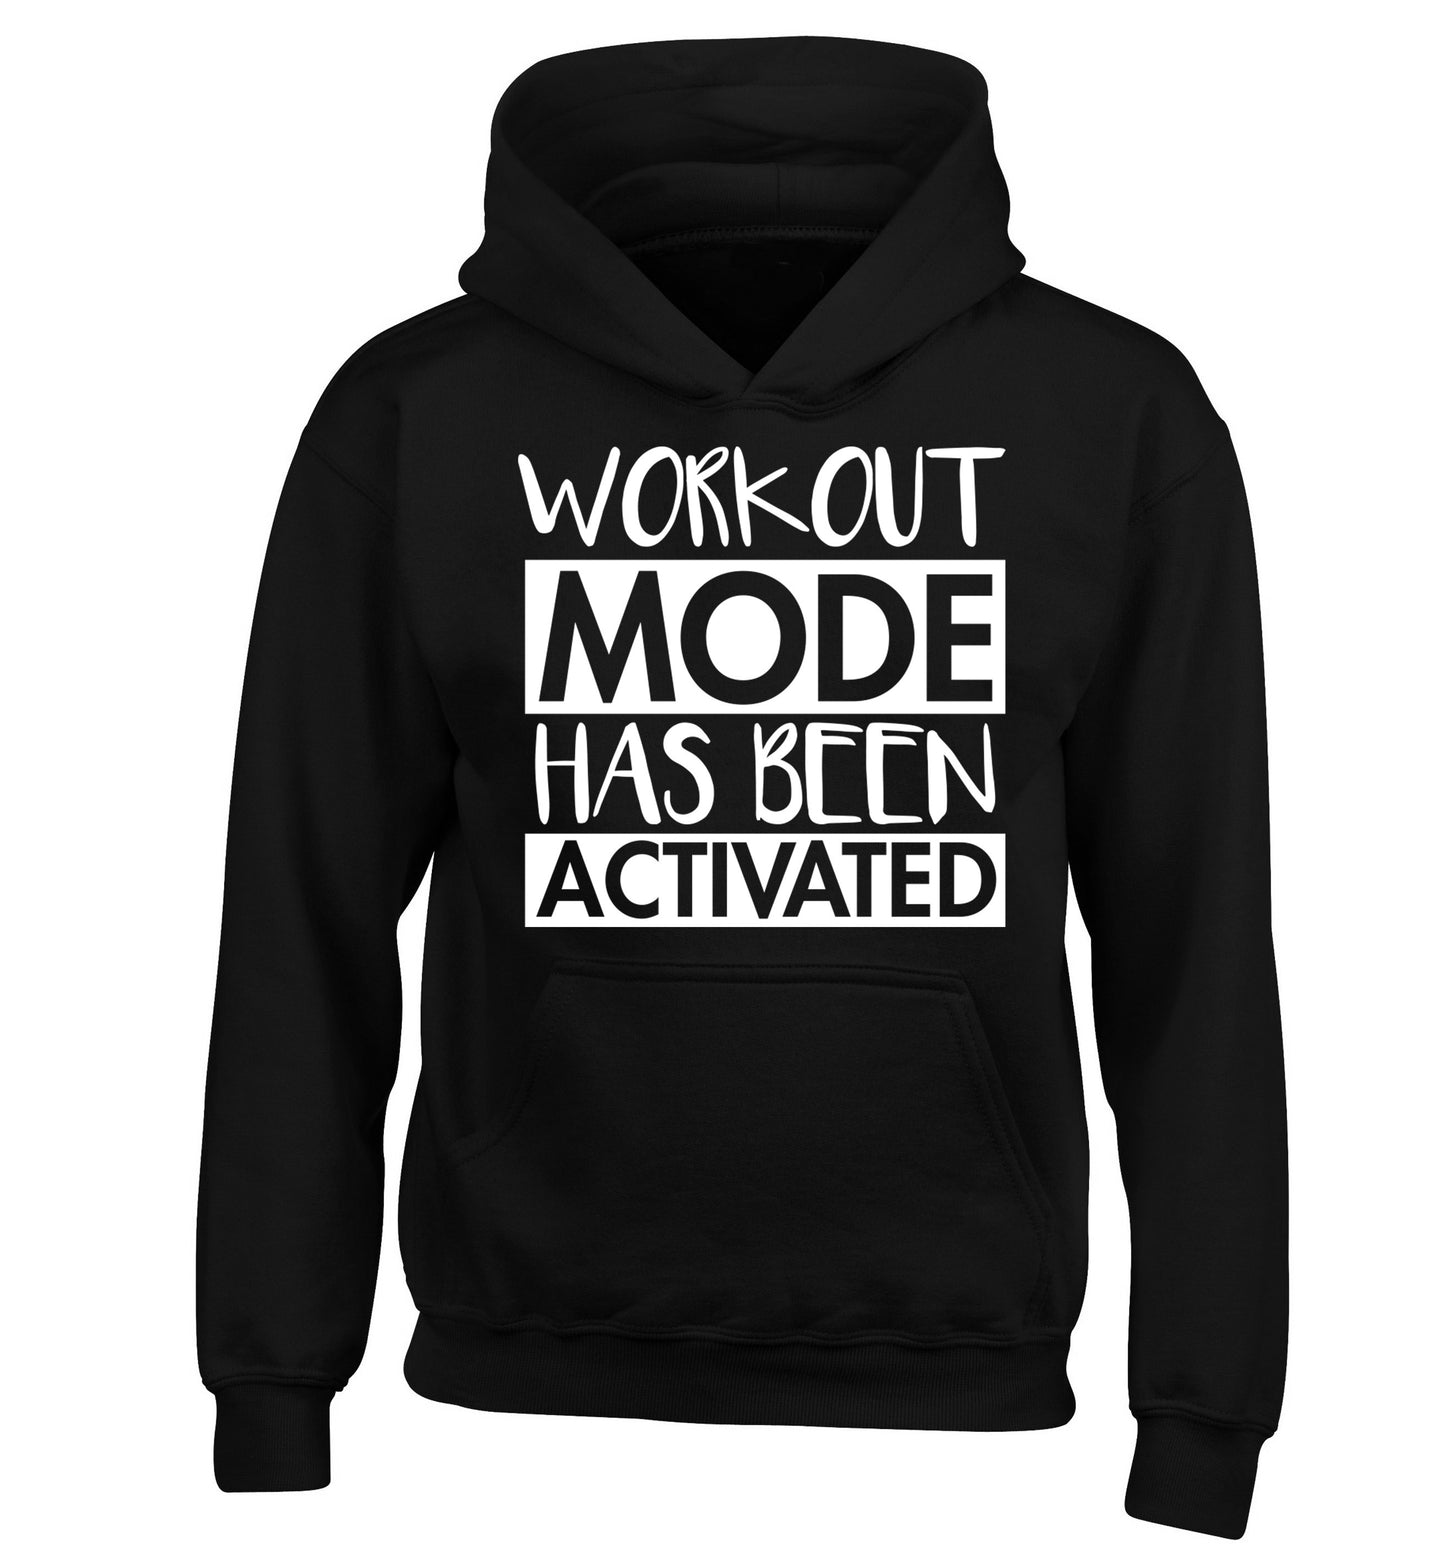 Workout mode has been activated children's black hoodie 12-14 Years